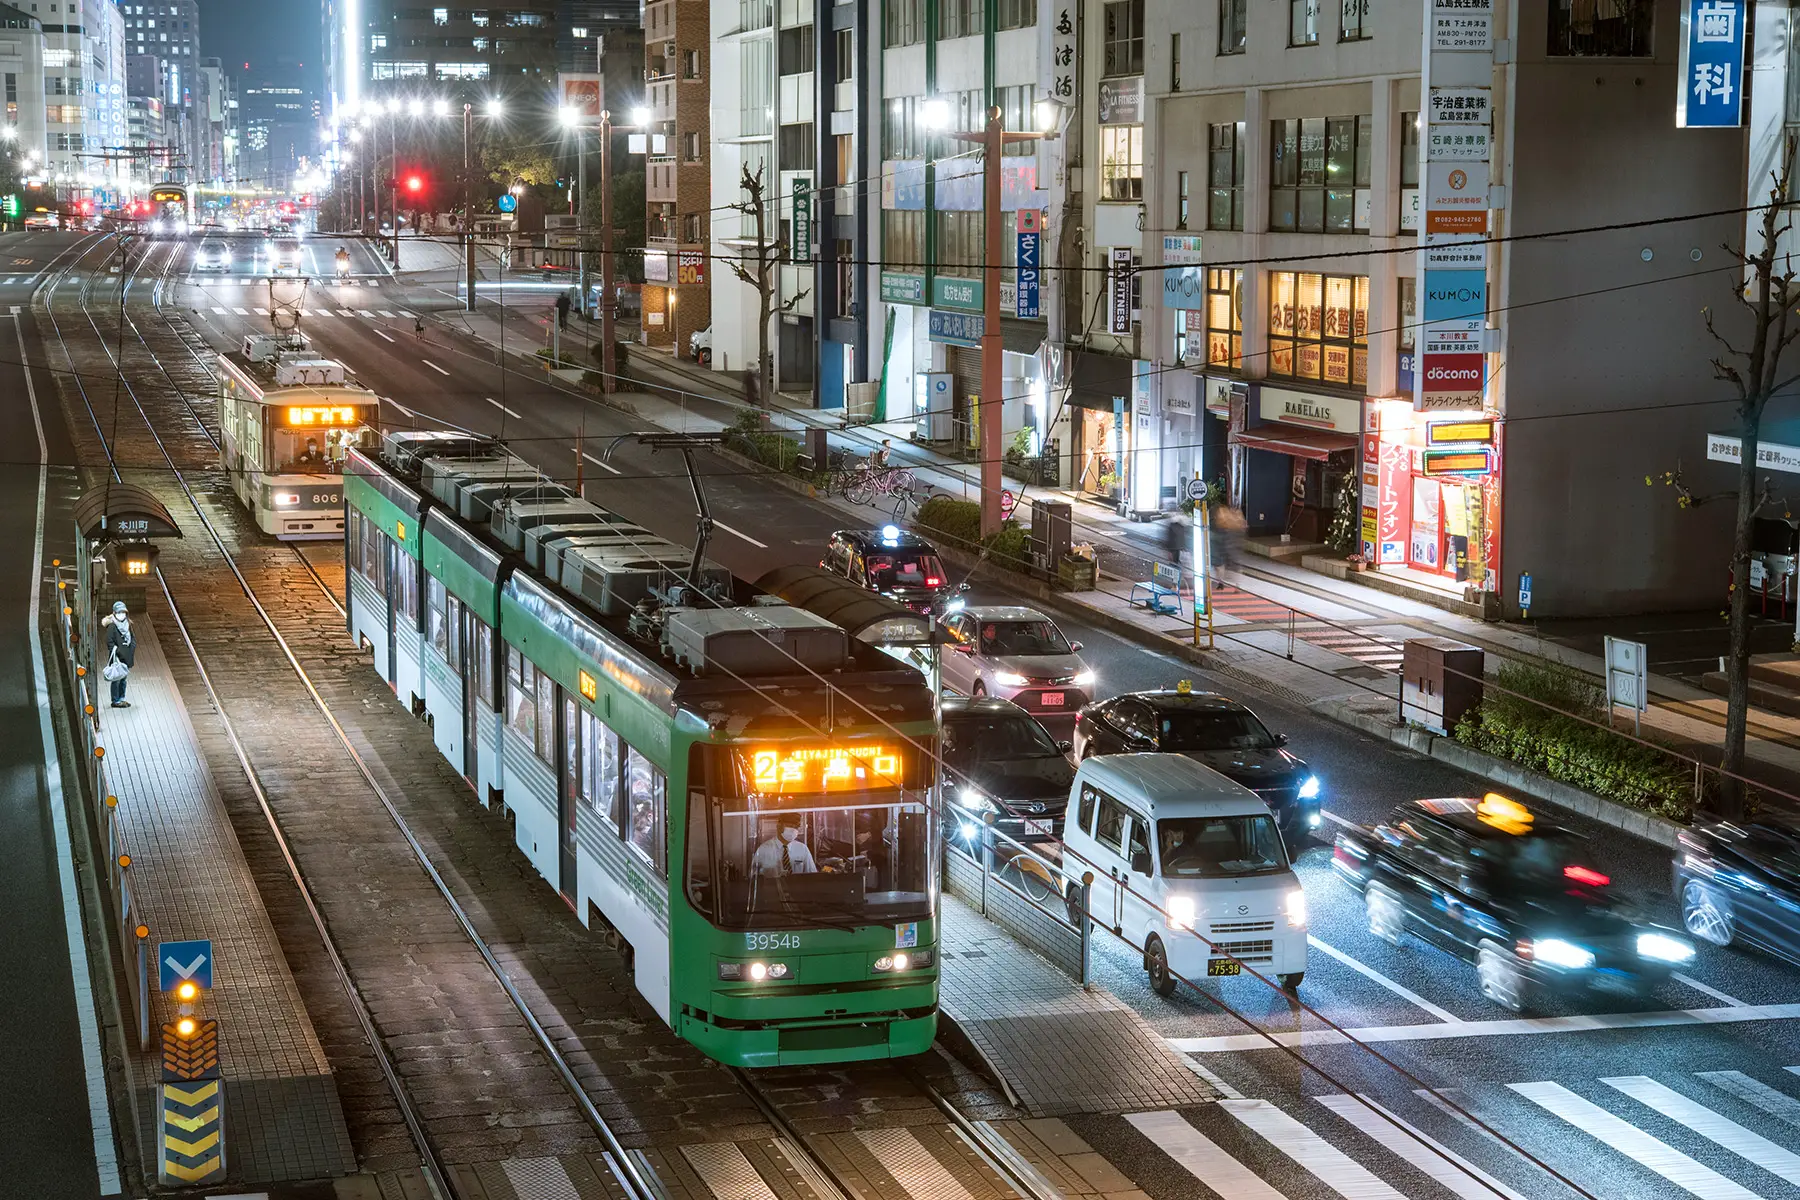 A tram and cars on a street in Hiroshima